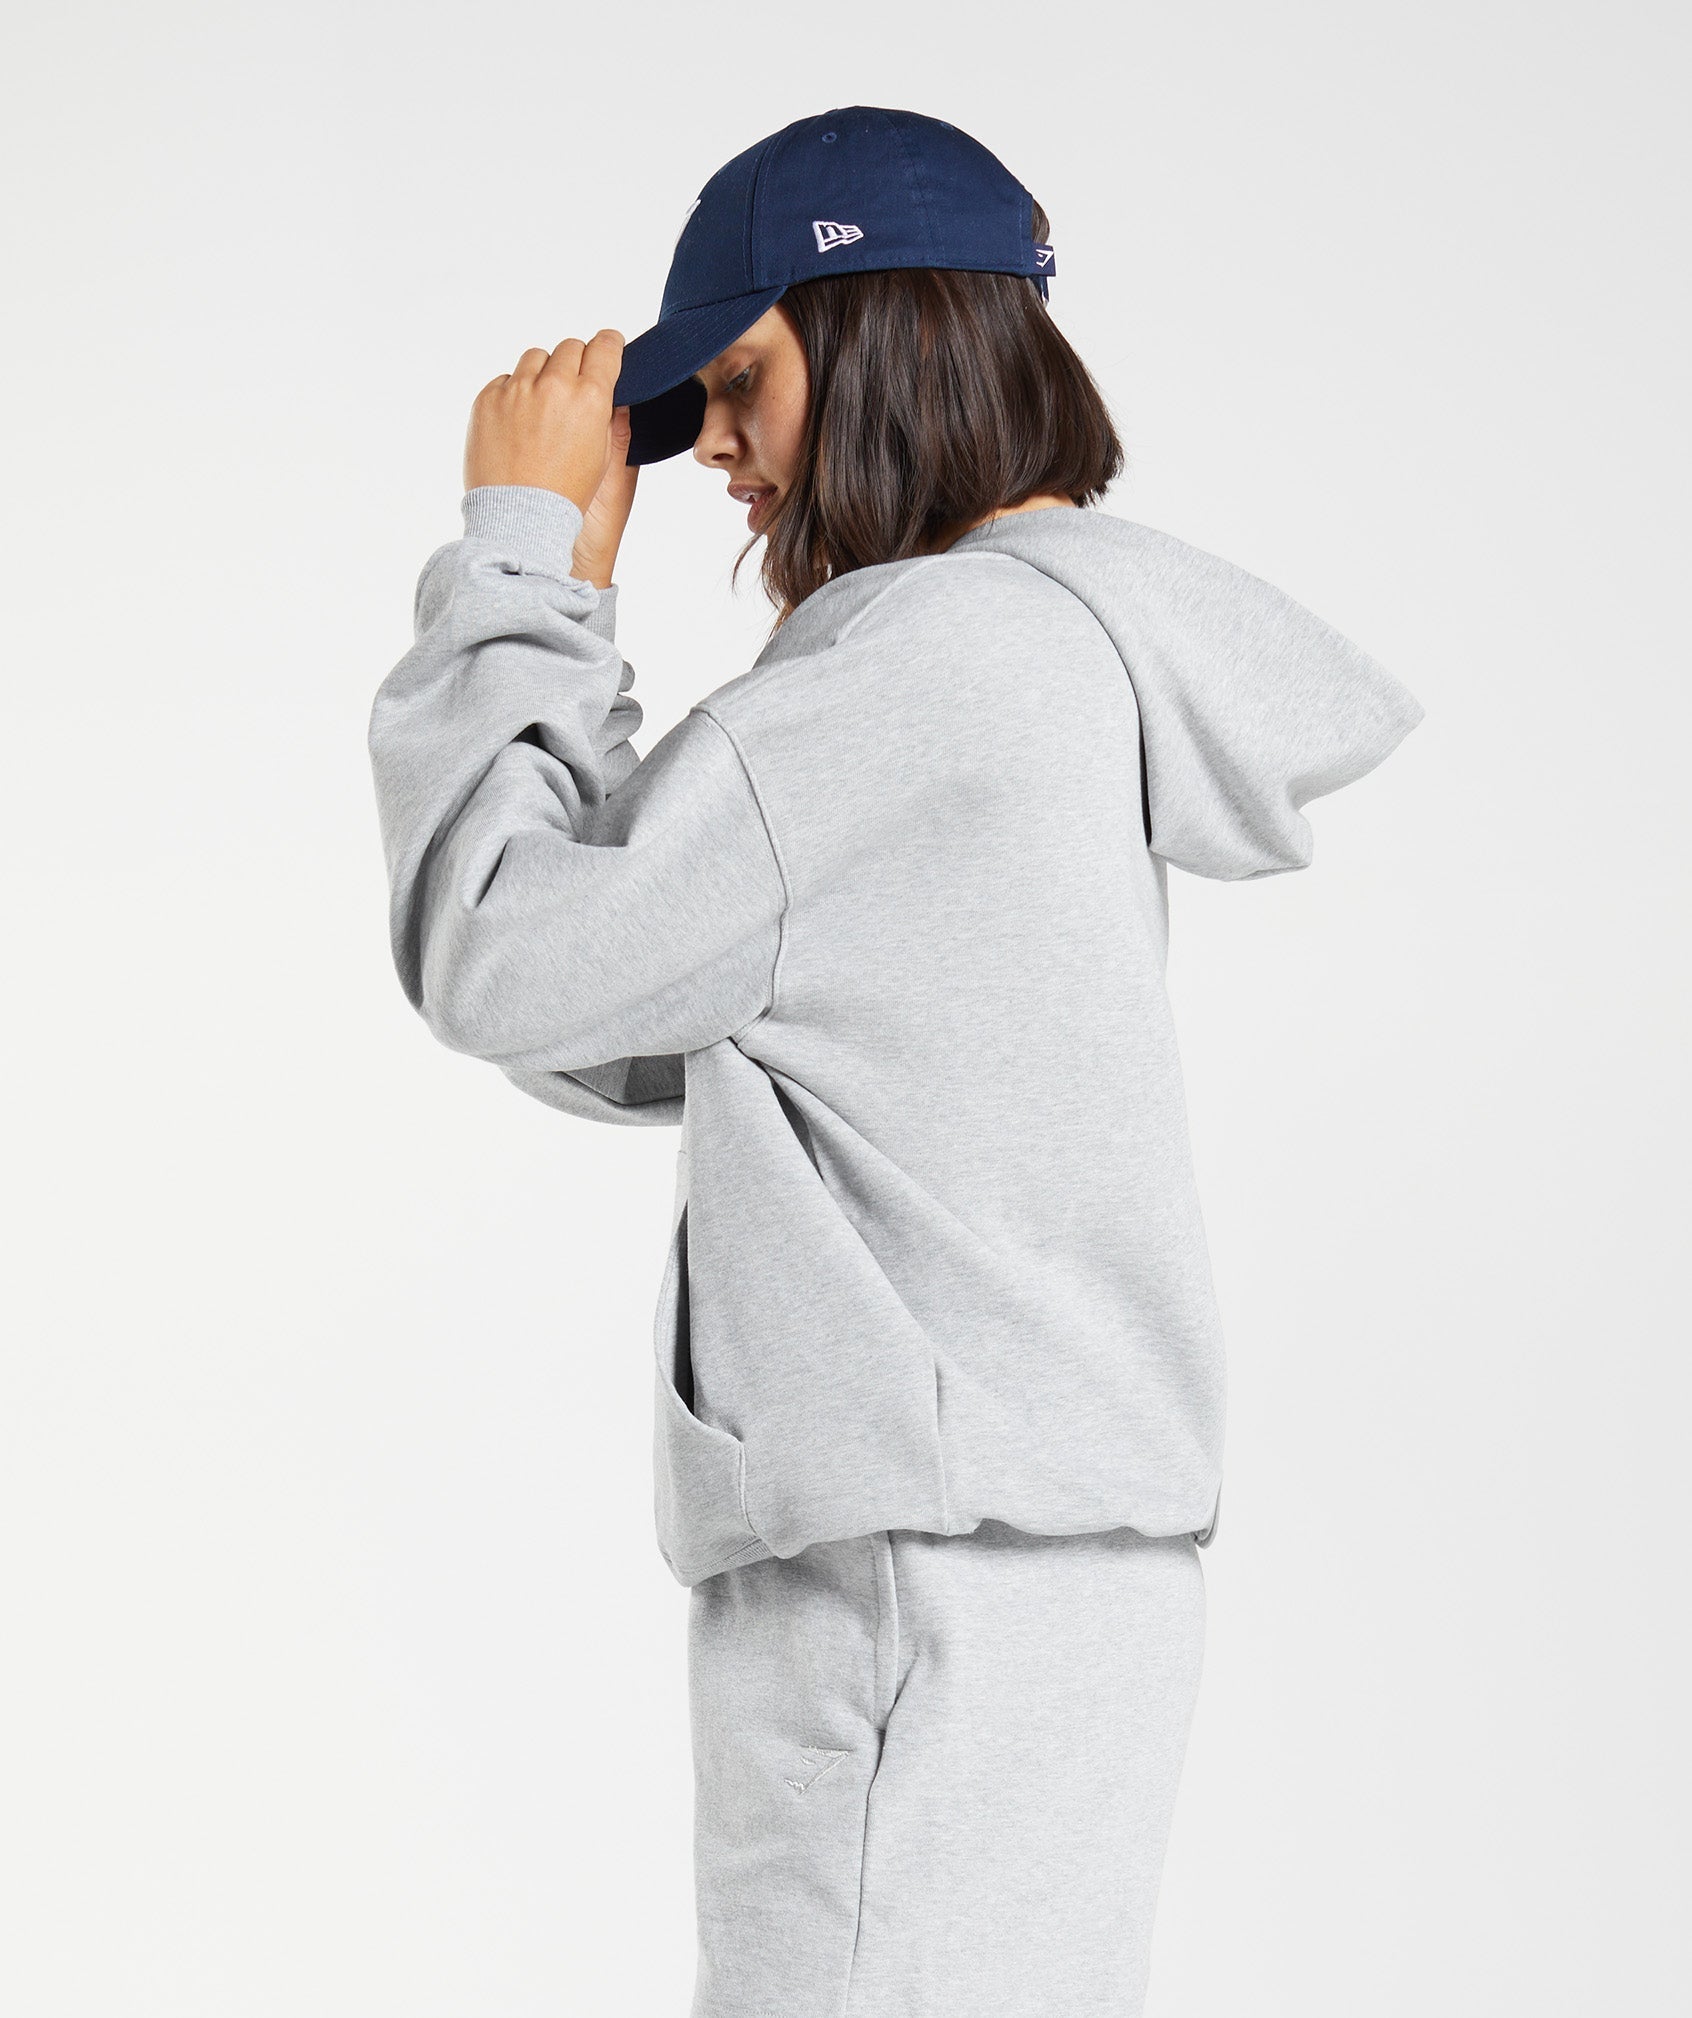 Rest Day Sweats Hoodie in Light Grey Core Marl - view 3